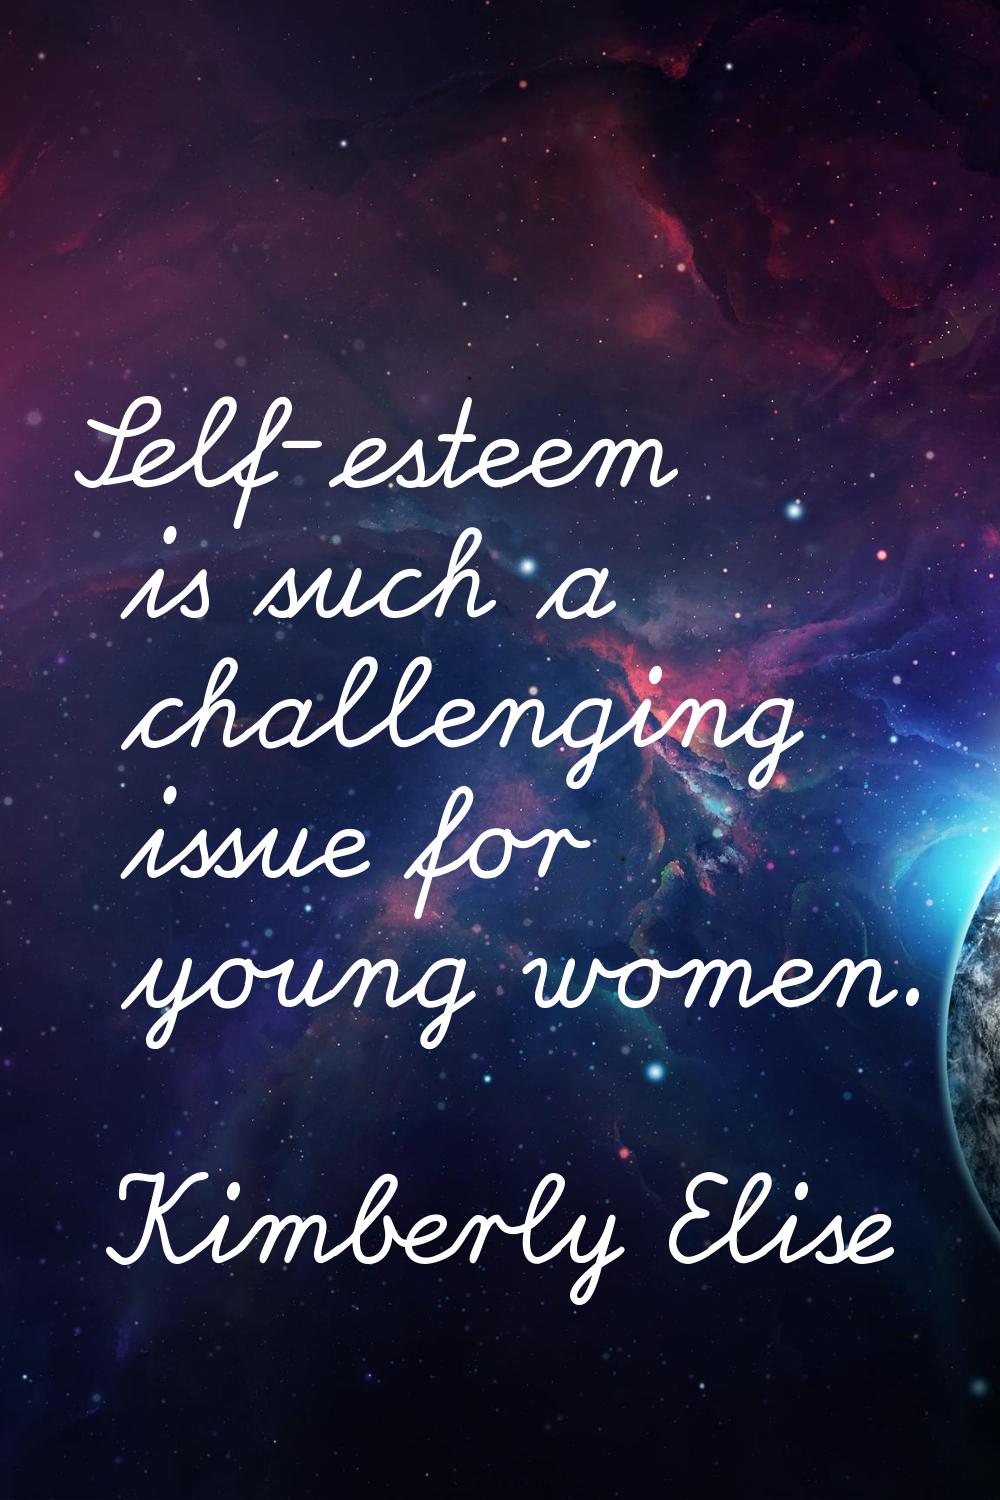 Self-esteem is such a challenging issue for young women.